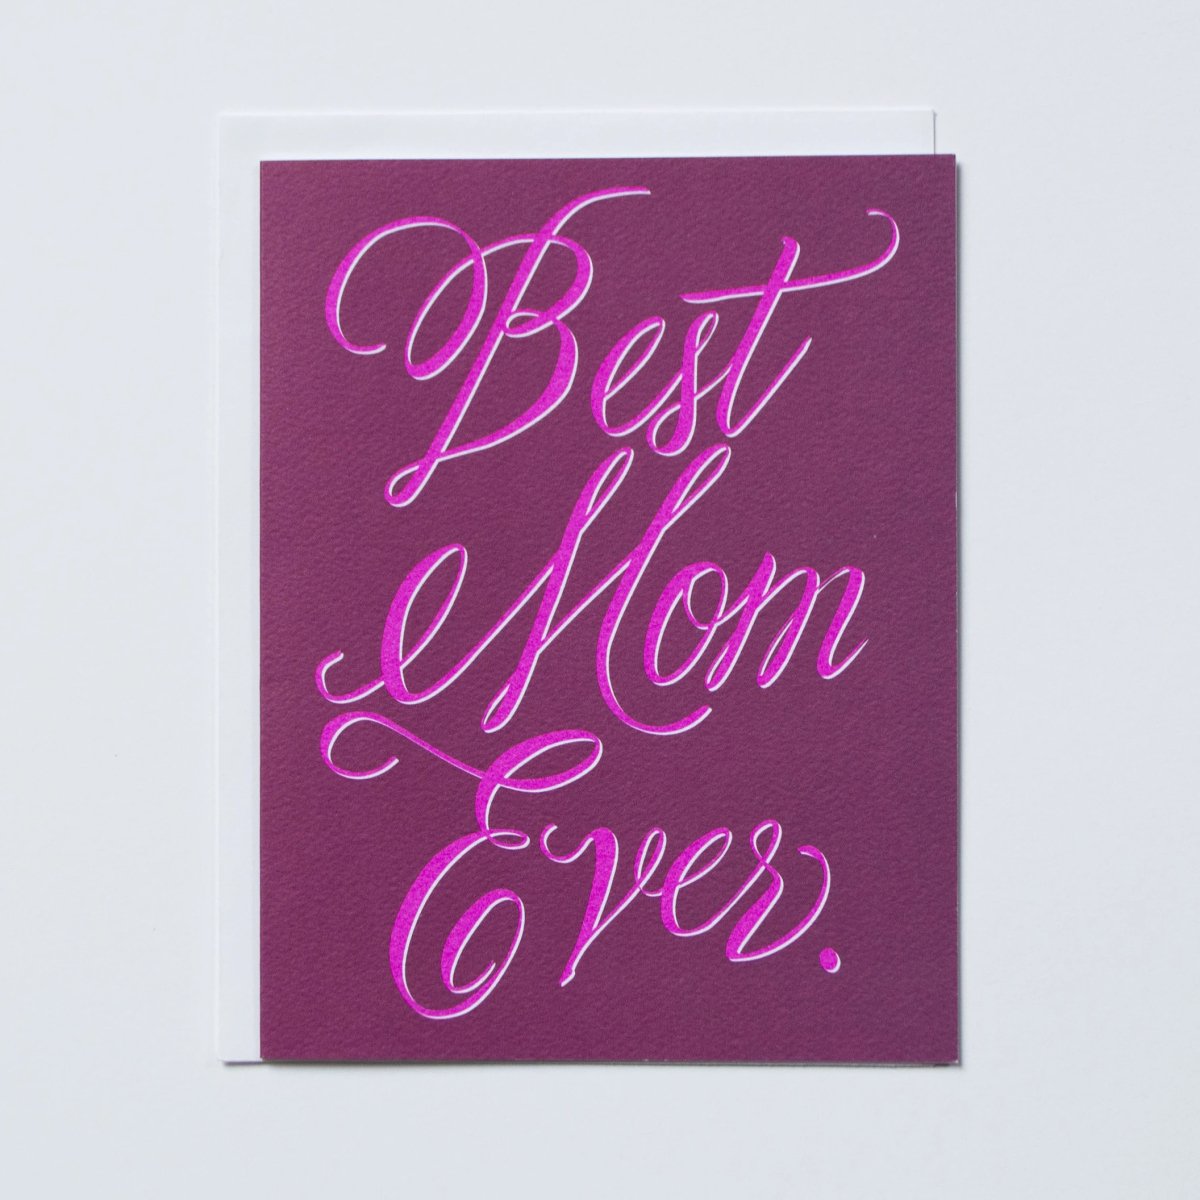 Greeting card reads "BEST MOM EVER" in fuchsia script against a purple background. Printed by Banquet Atelier in Vancouver, Canada.